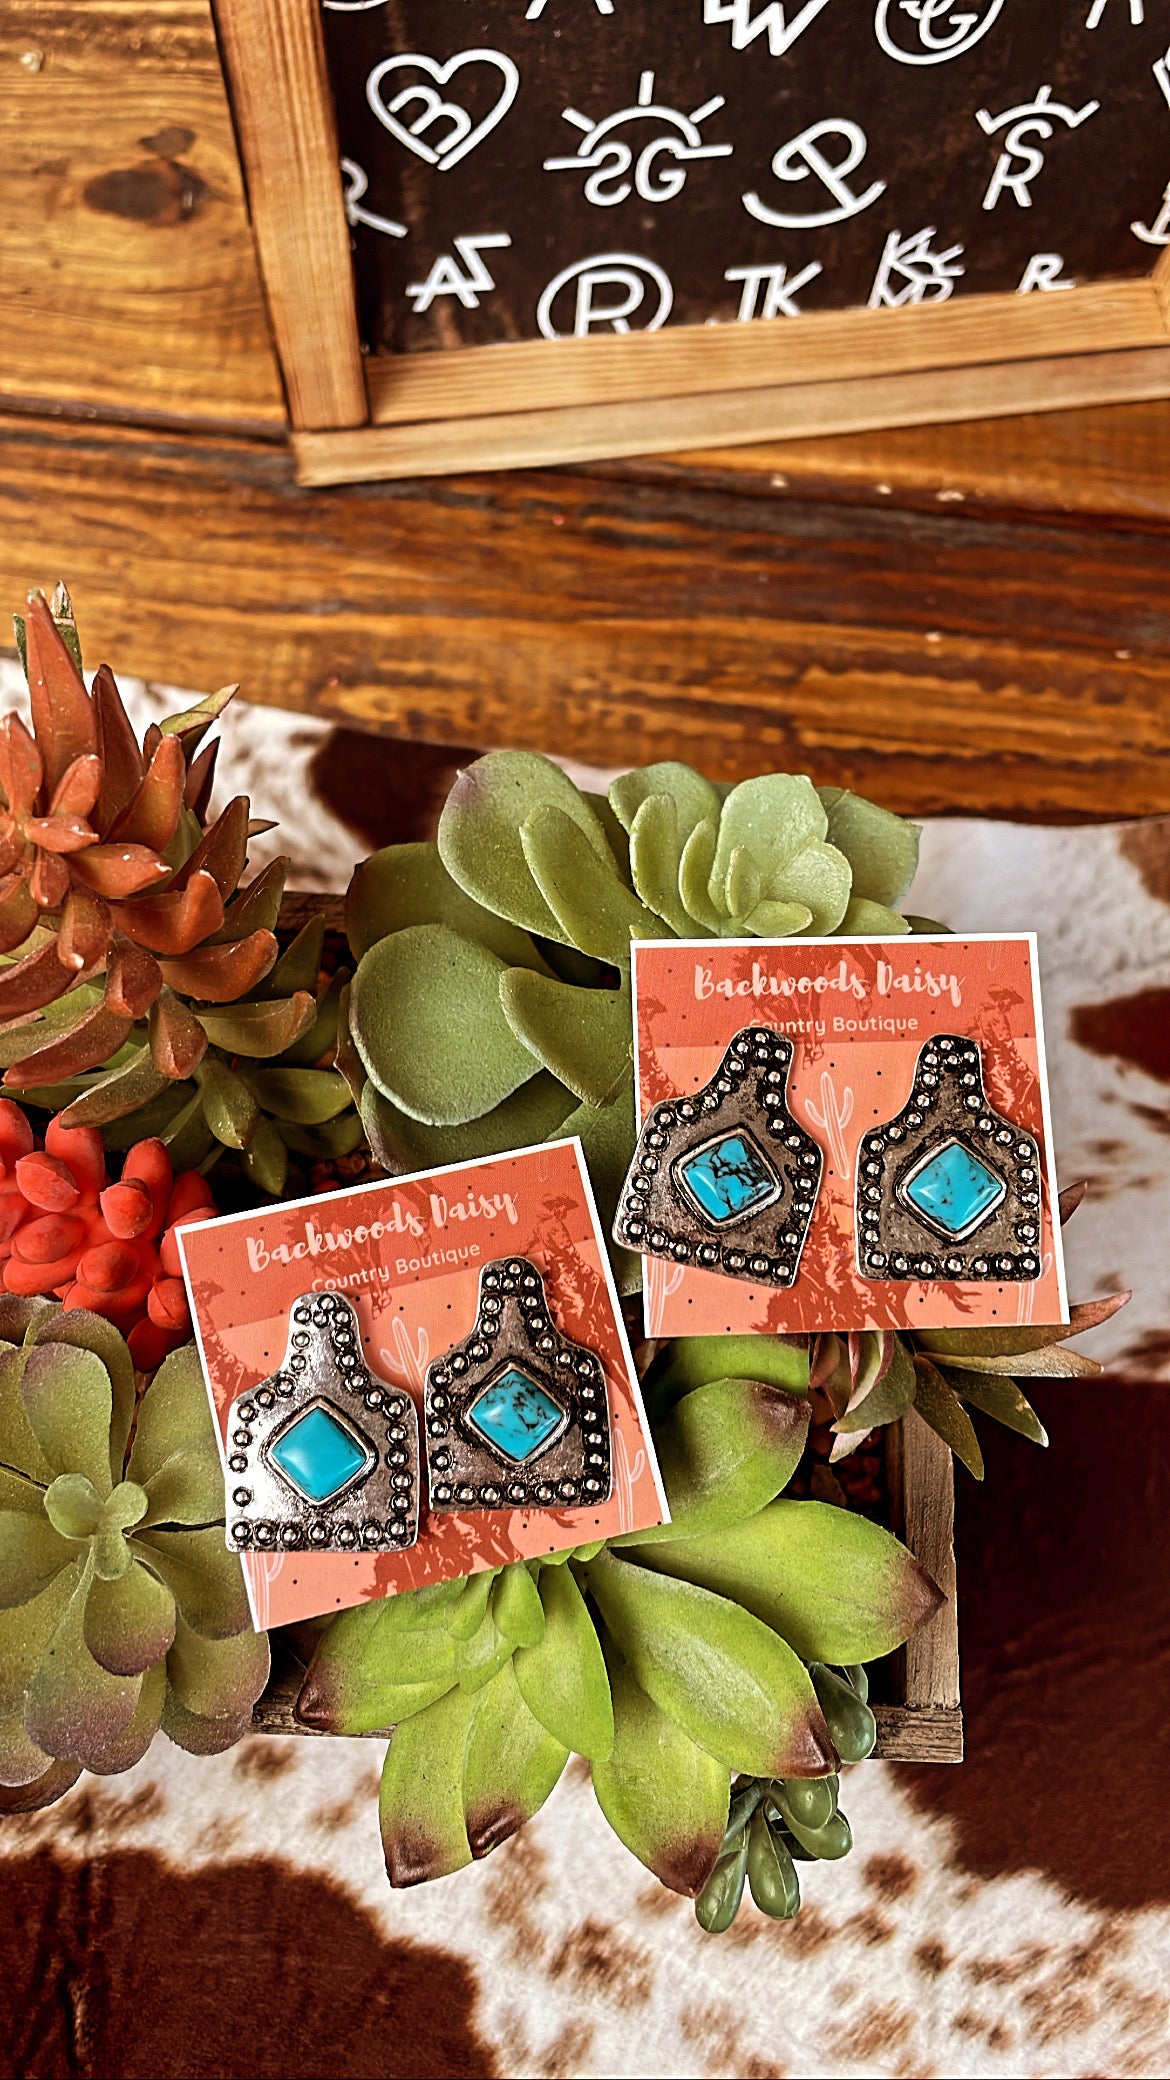 Turquoise Cattle Tag Earrings